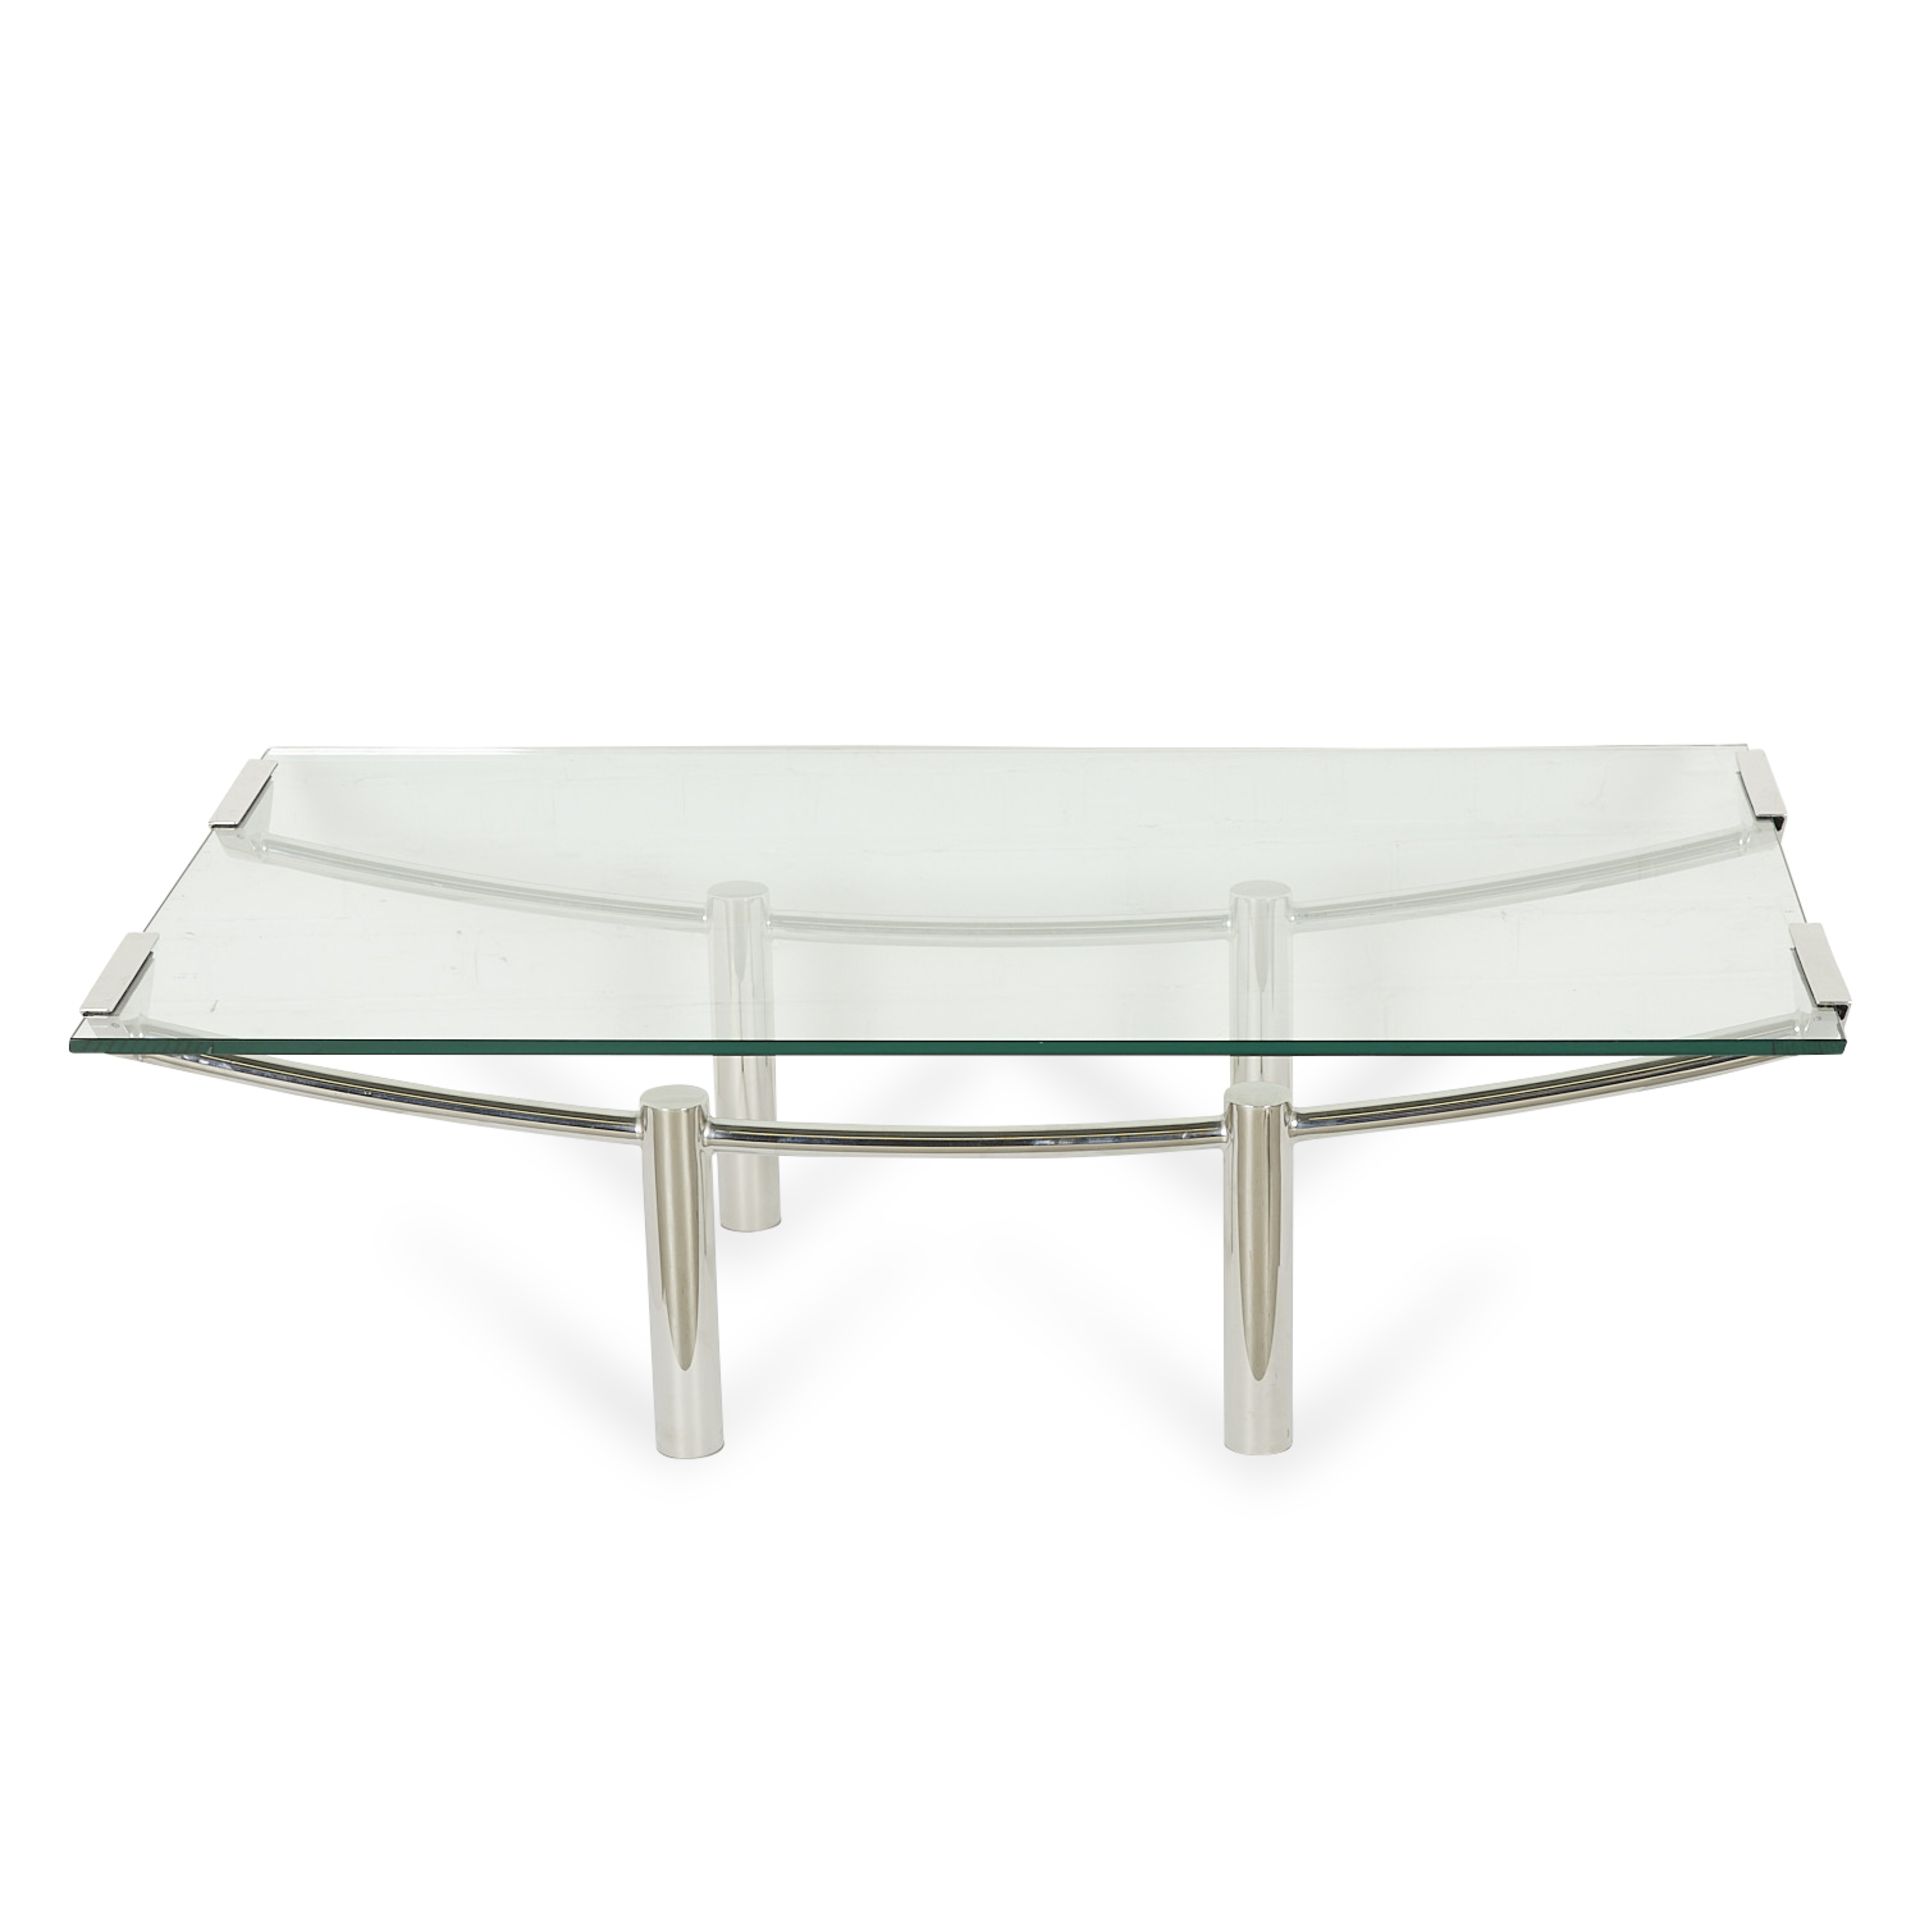 Brueton "Structures" Low Coffee Table w/ Glass Top - Image 10 of 12